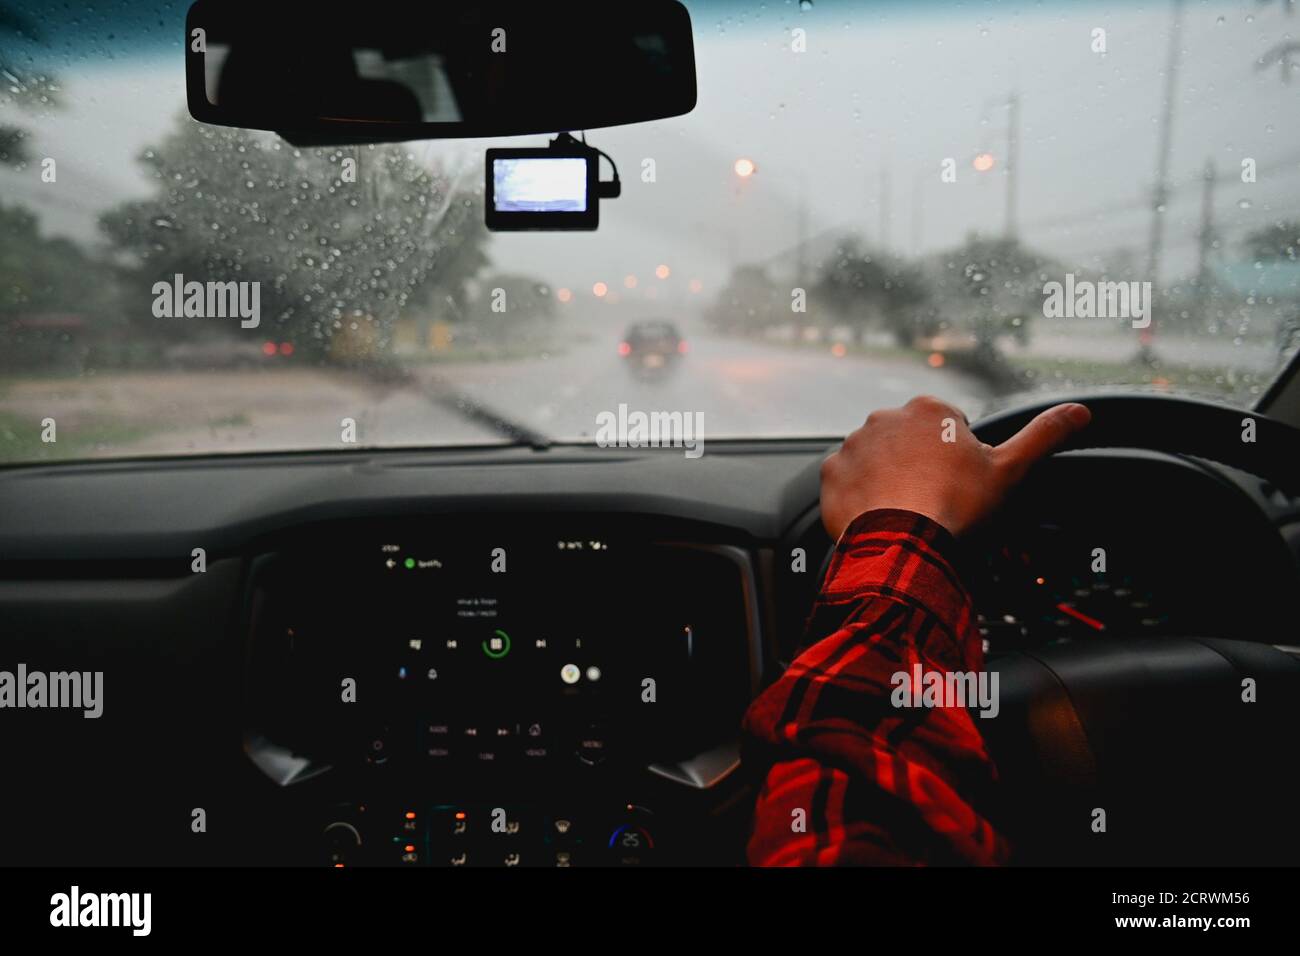 Man driving a car in the rain at night driving bad weather conditions on road Stock Photo